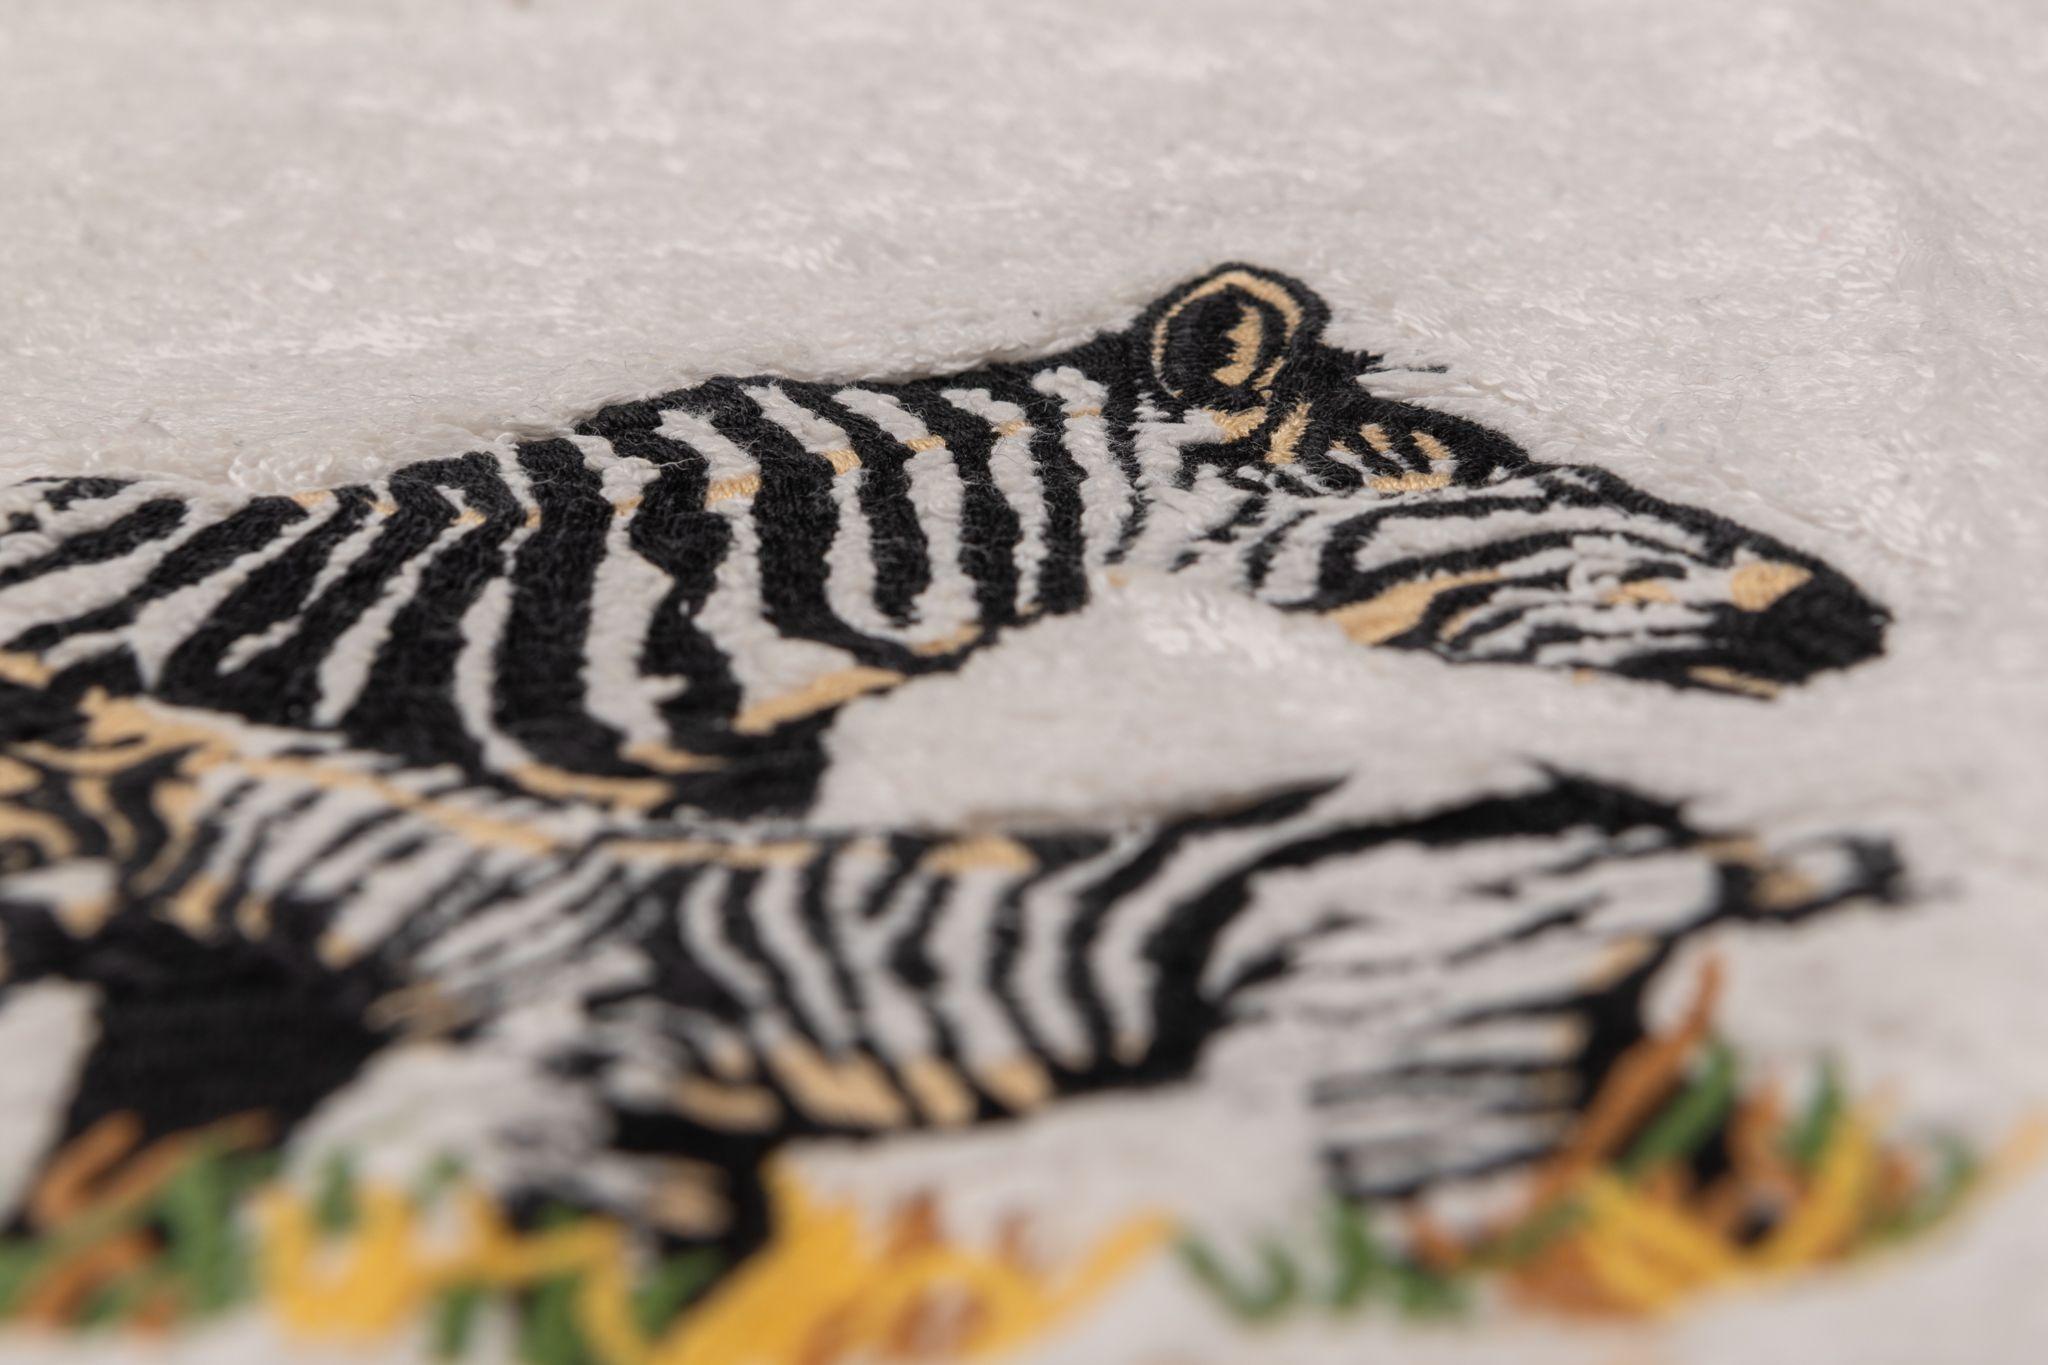 Hermès Vintage Terry Cloth Zebra Towel In Excellent Condition For Sale In West Hollywood, CA